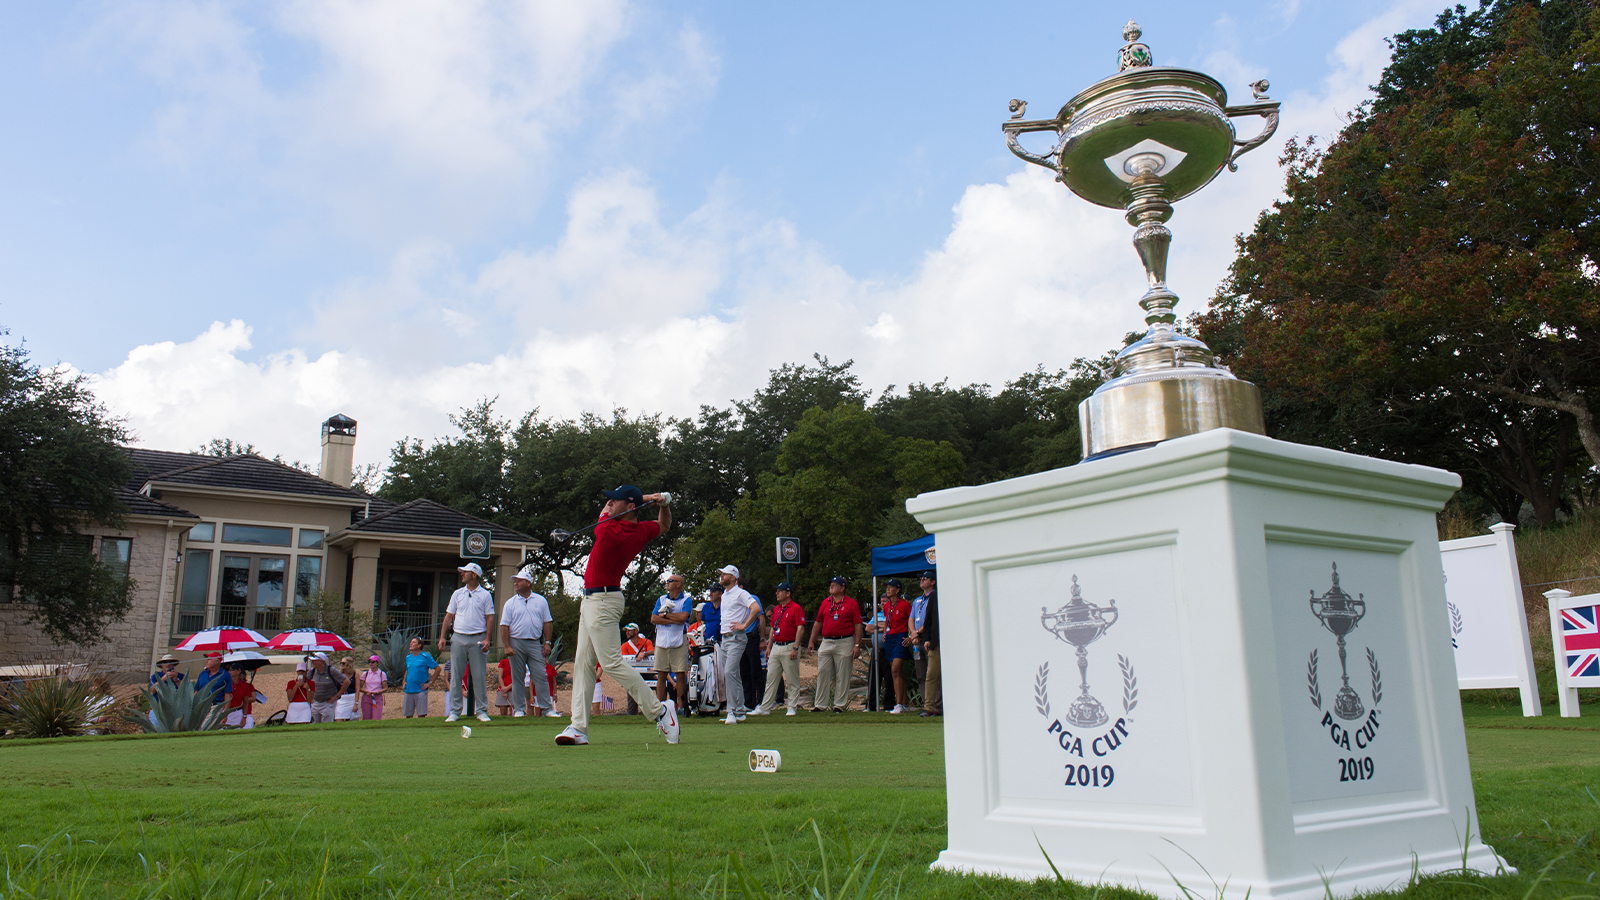   
																A Brief History of the PGA Cup 
															 